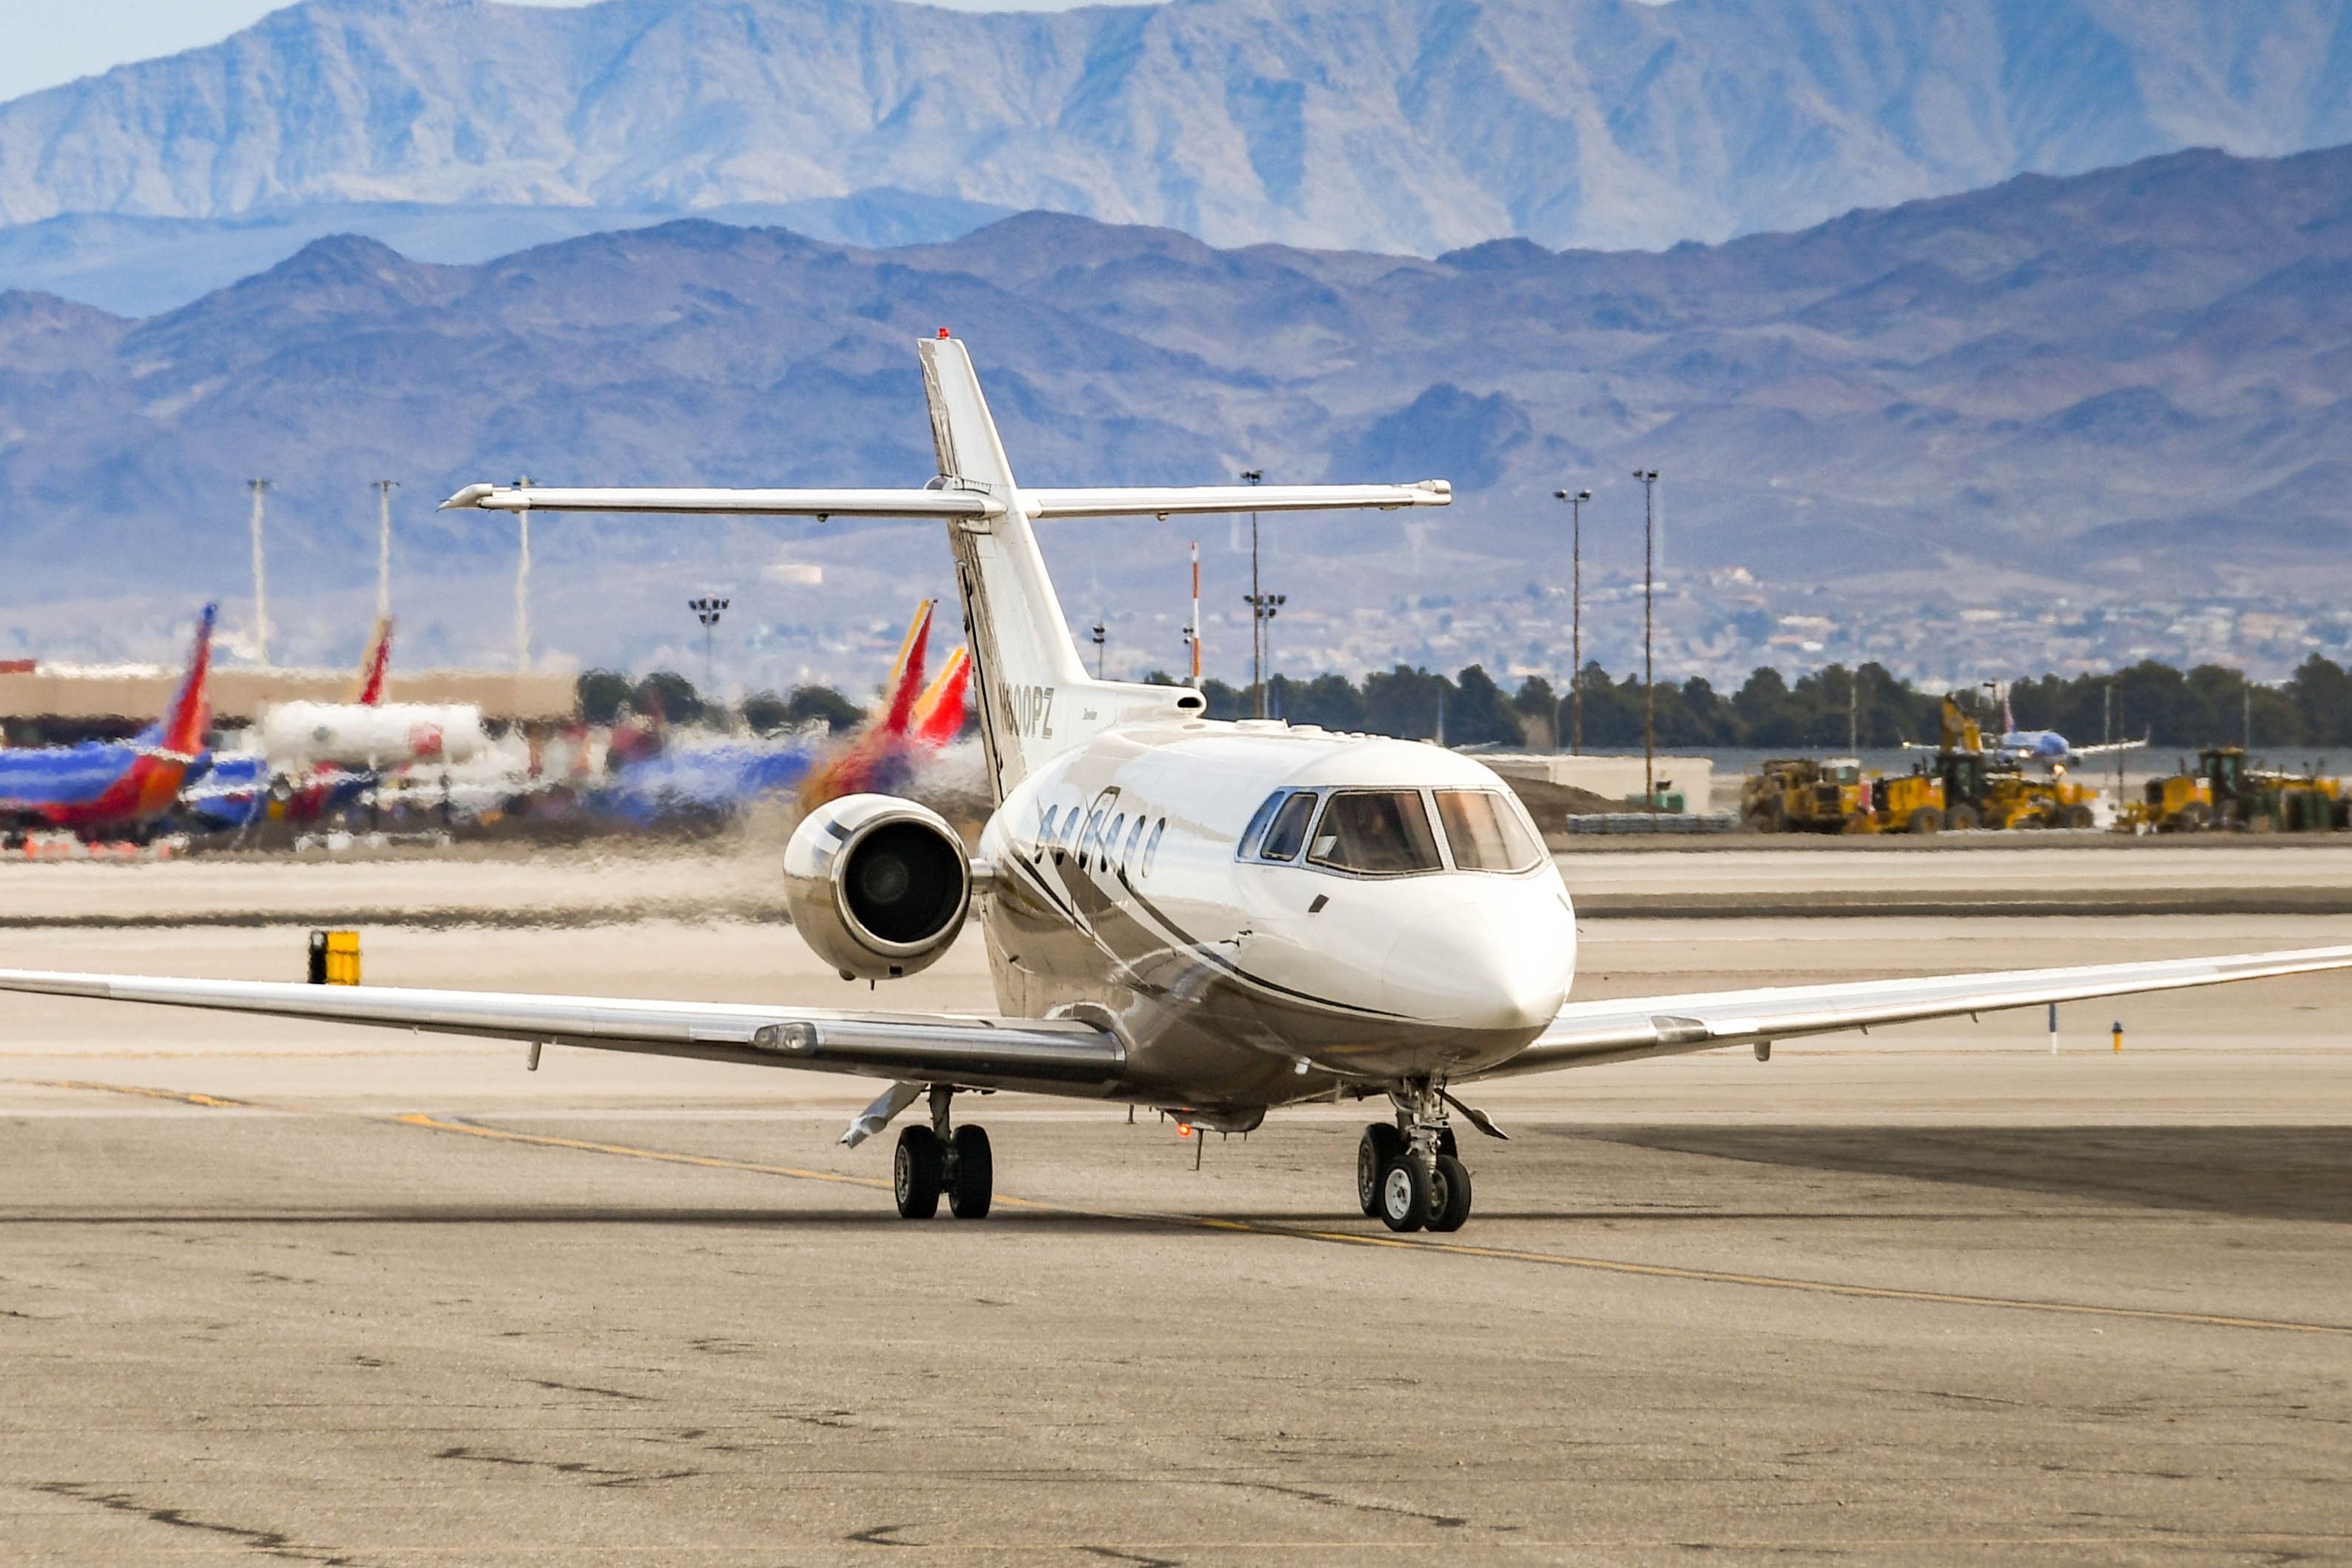 Hawker 800 private executive jet taxiing after landing at Harry Reid International Airport in Las Vegas.